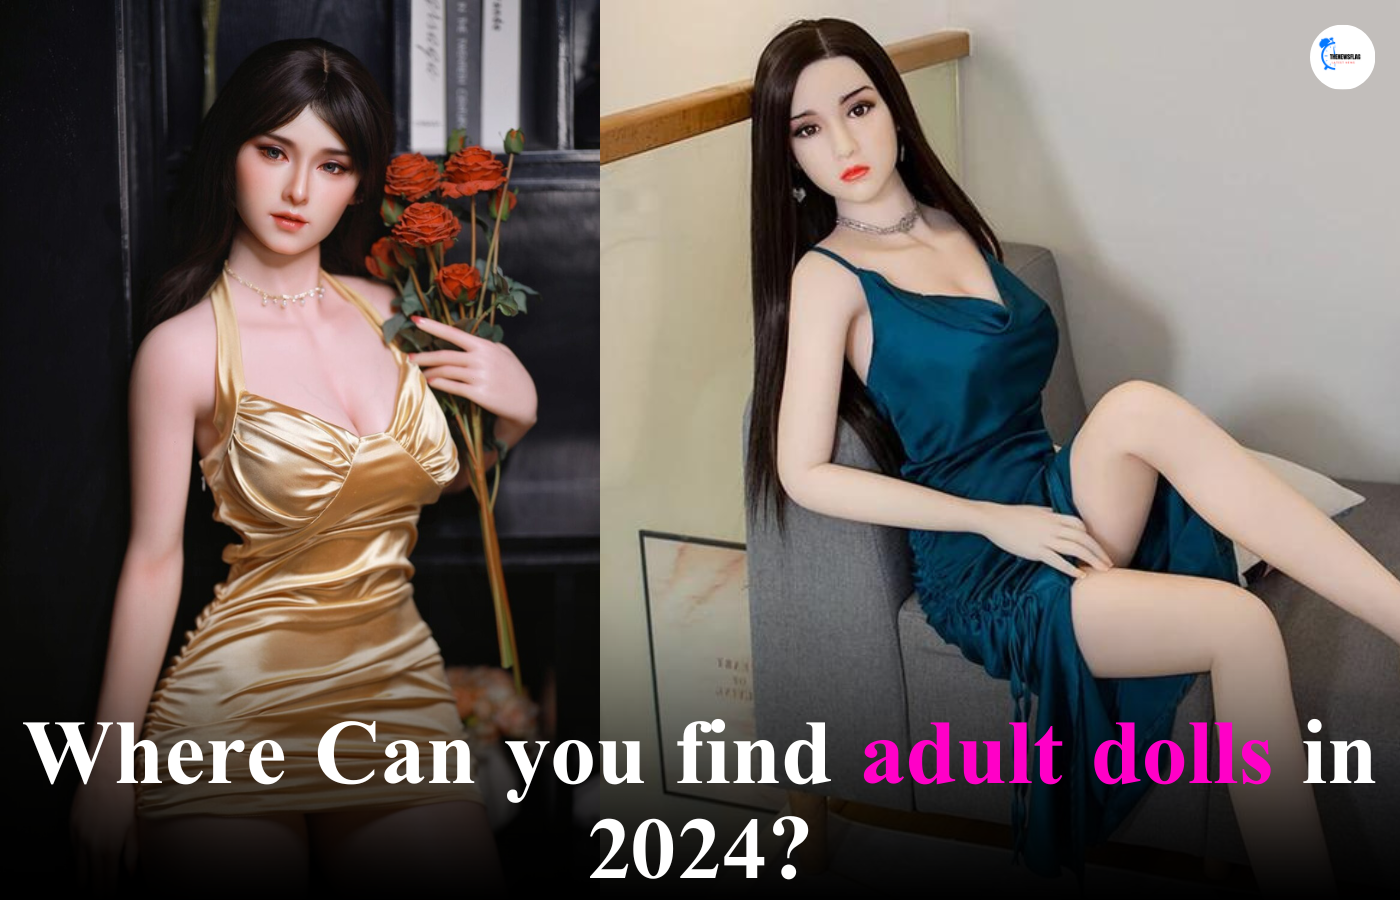 Where Can you find adult dolls?